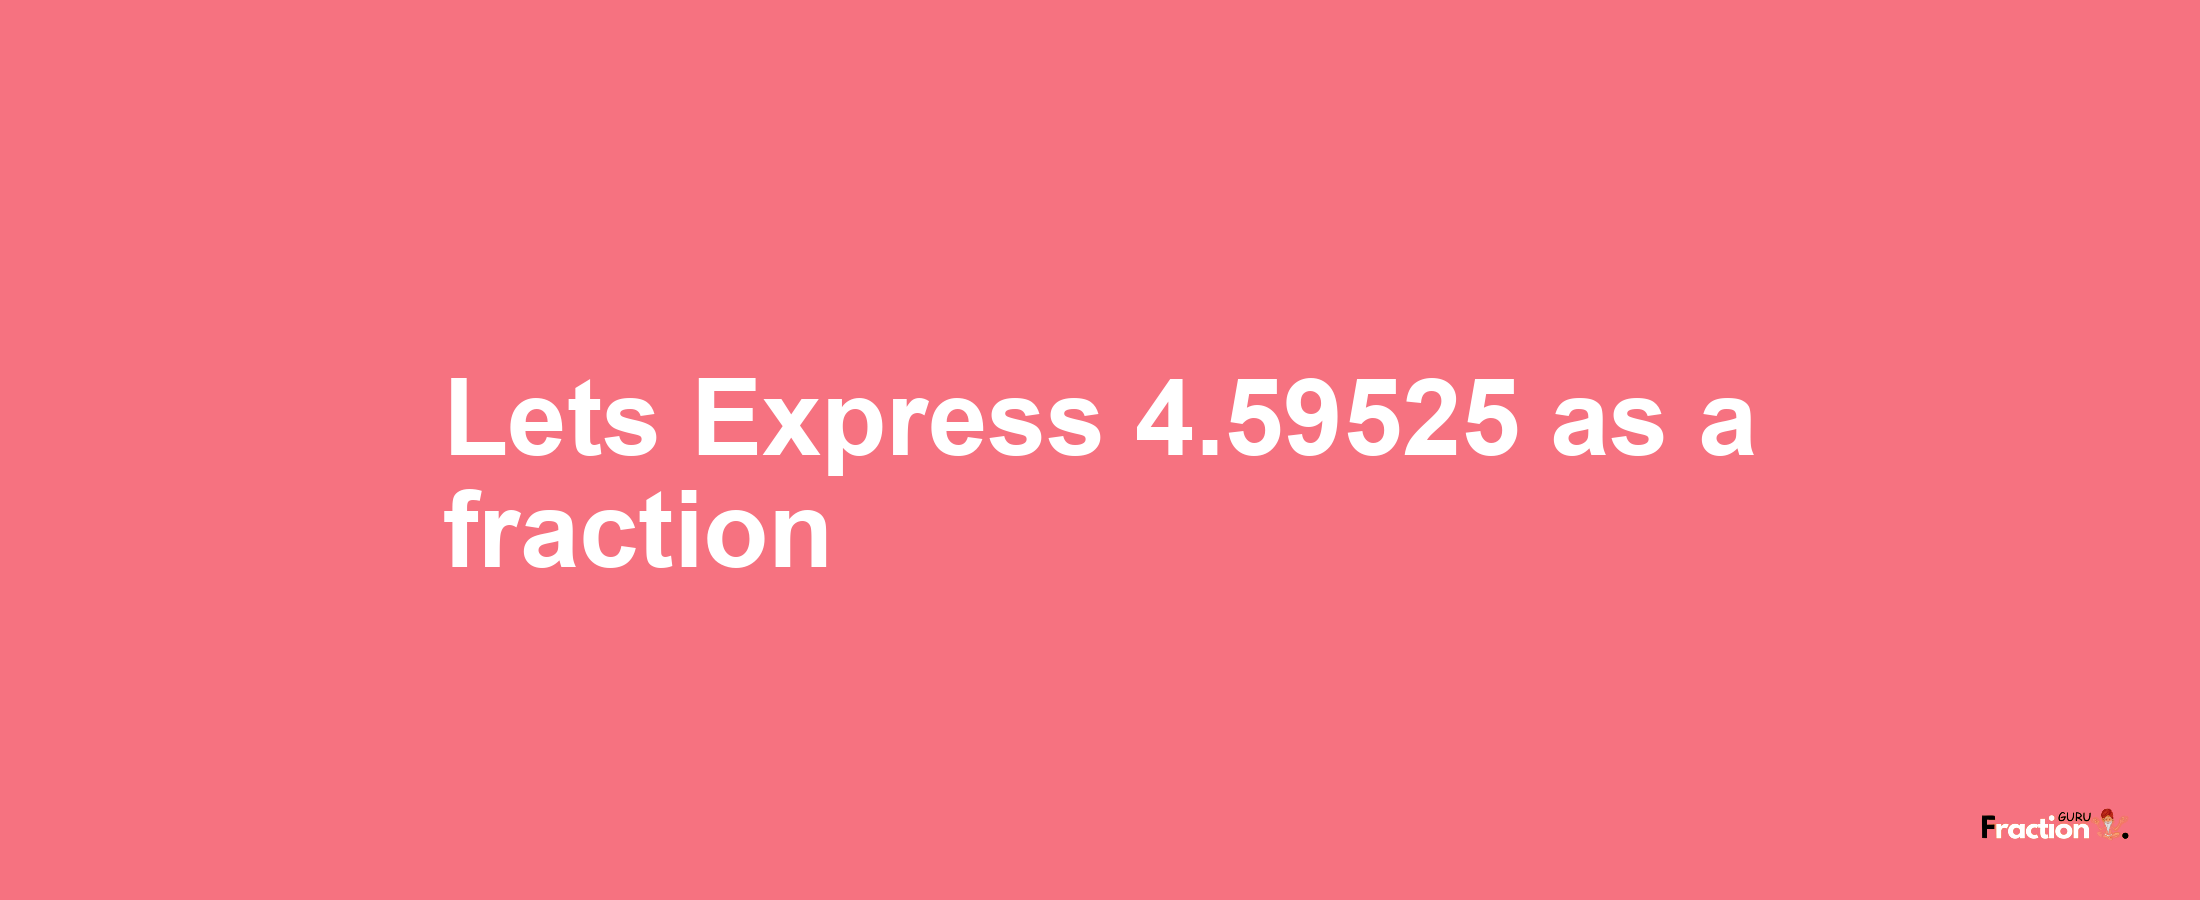 Lets Express 4.59525 as afraction